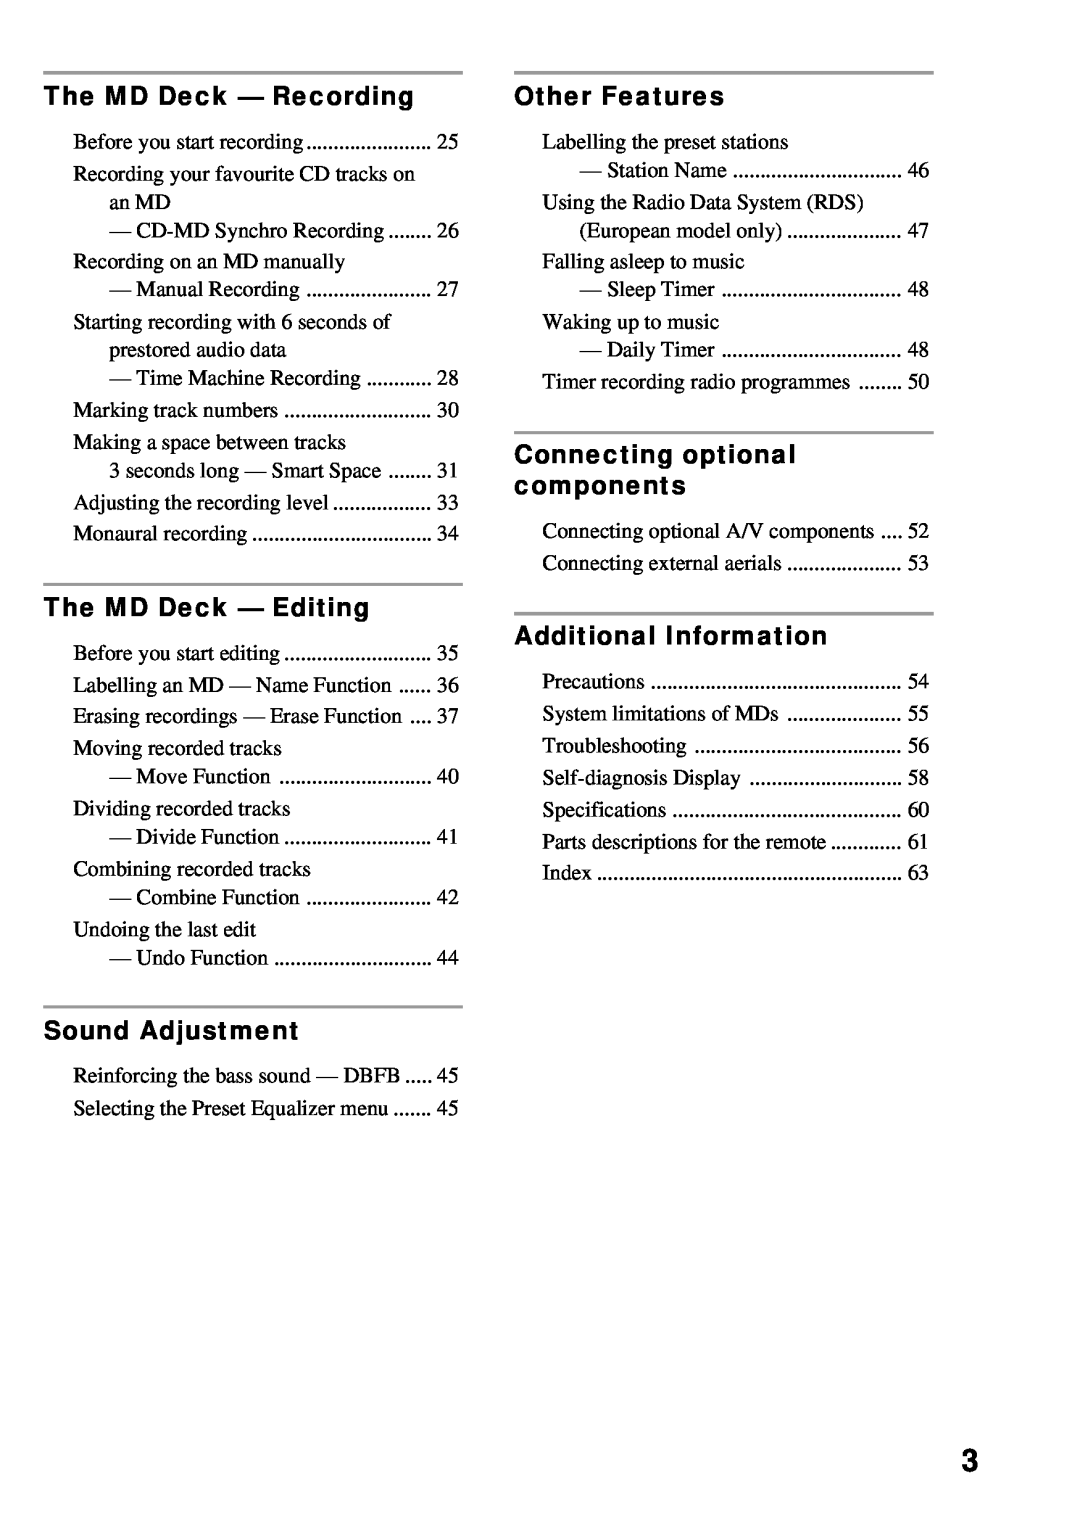 Sony DHC-MD373 manual The MD Deck - Recording, The MD Deck - Editing, Sound Adjustment, Other Features, Connecting optional 